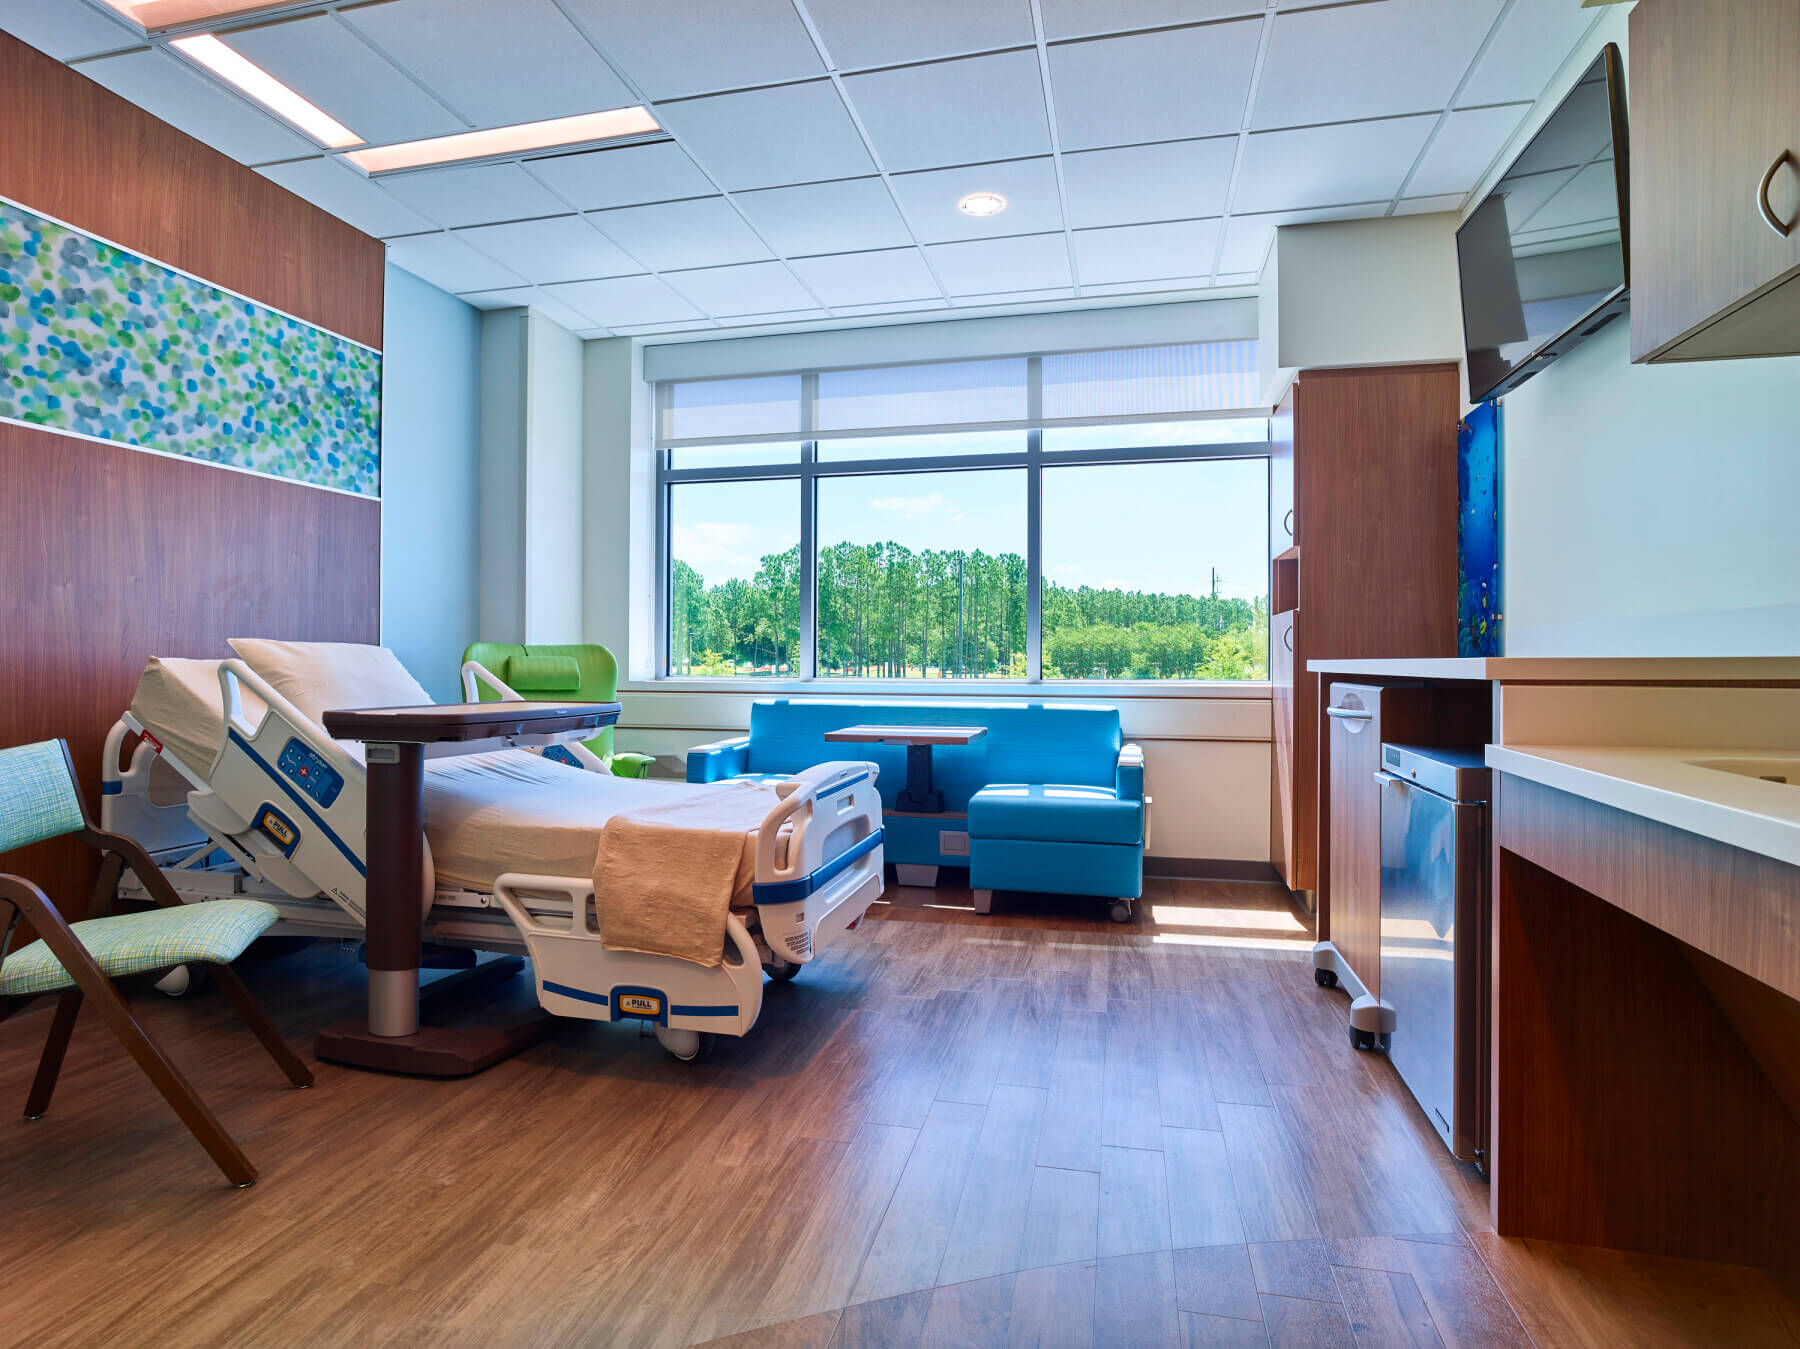 patient room in a hospital